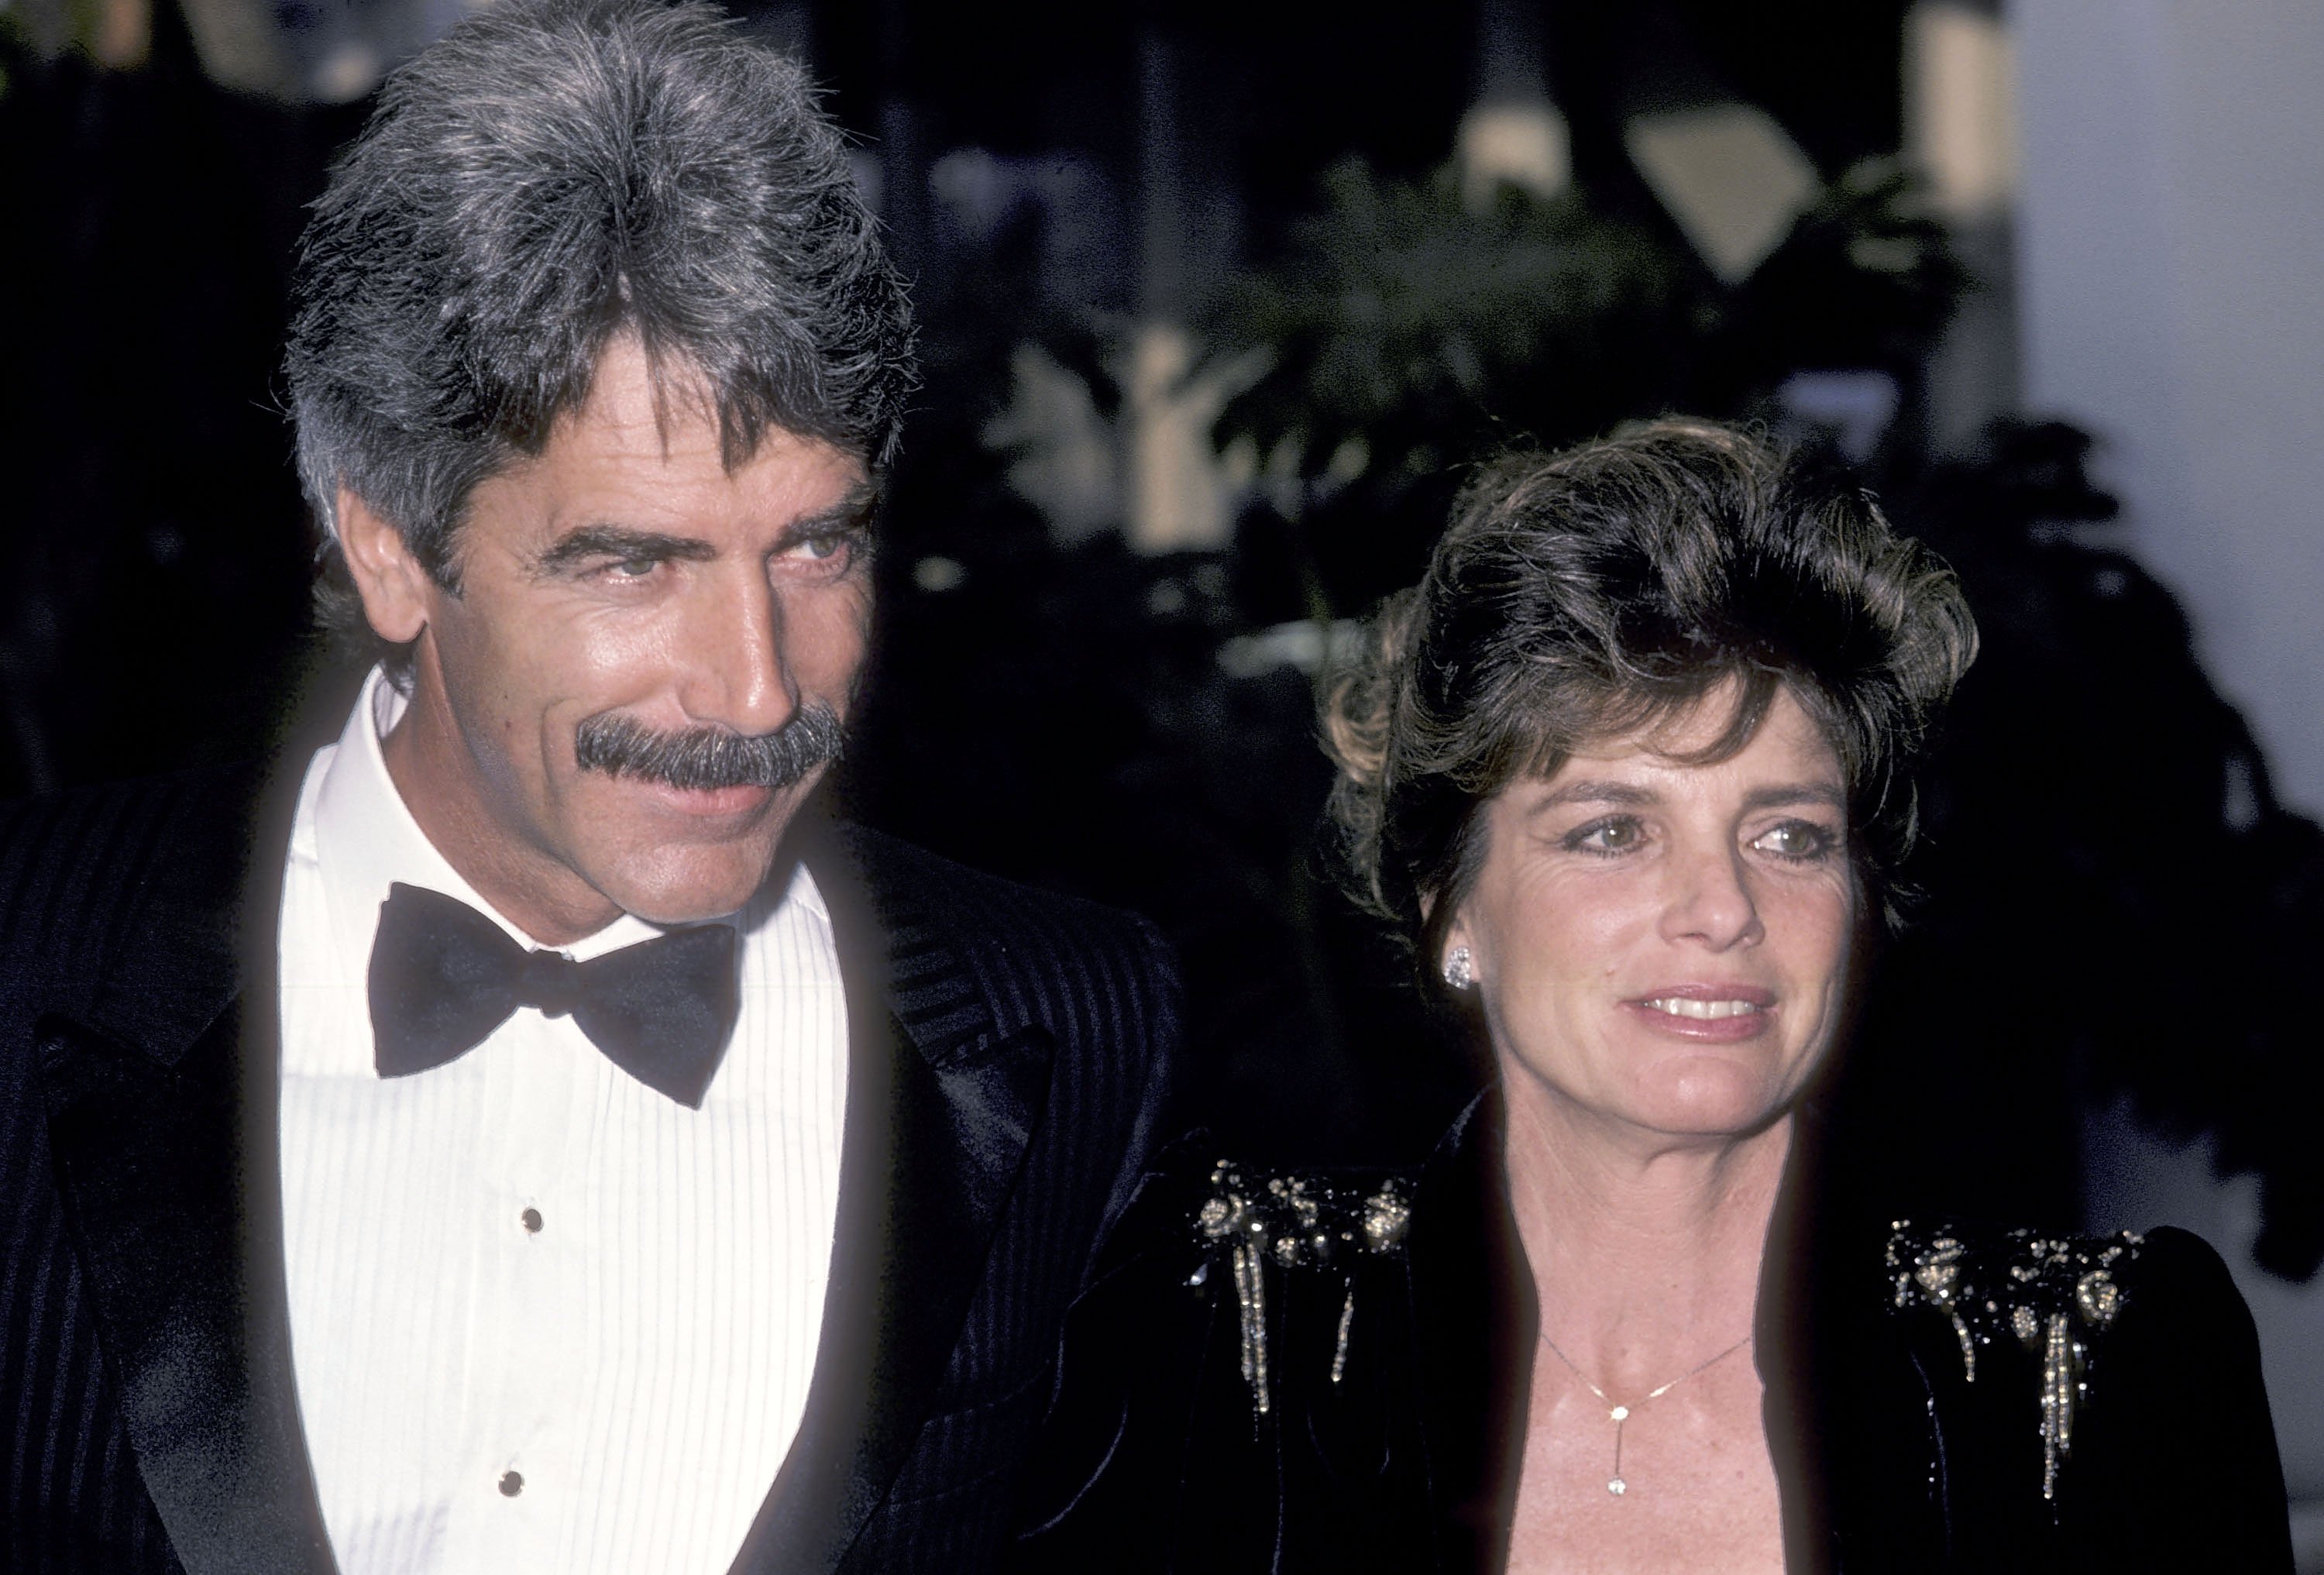 Actor Sam Elliott and actress Katharine Ross attend the 12th Annual People's Choice Awards on March 11, 1986 at the Santa Monica Civic Auditorium in Santa Monica, California. | Source: Getty Images